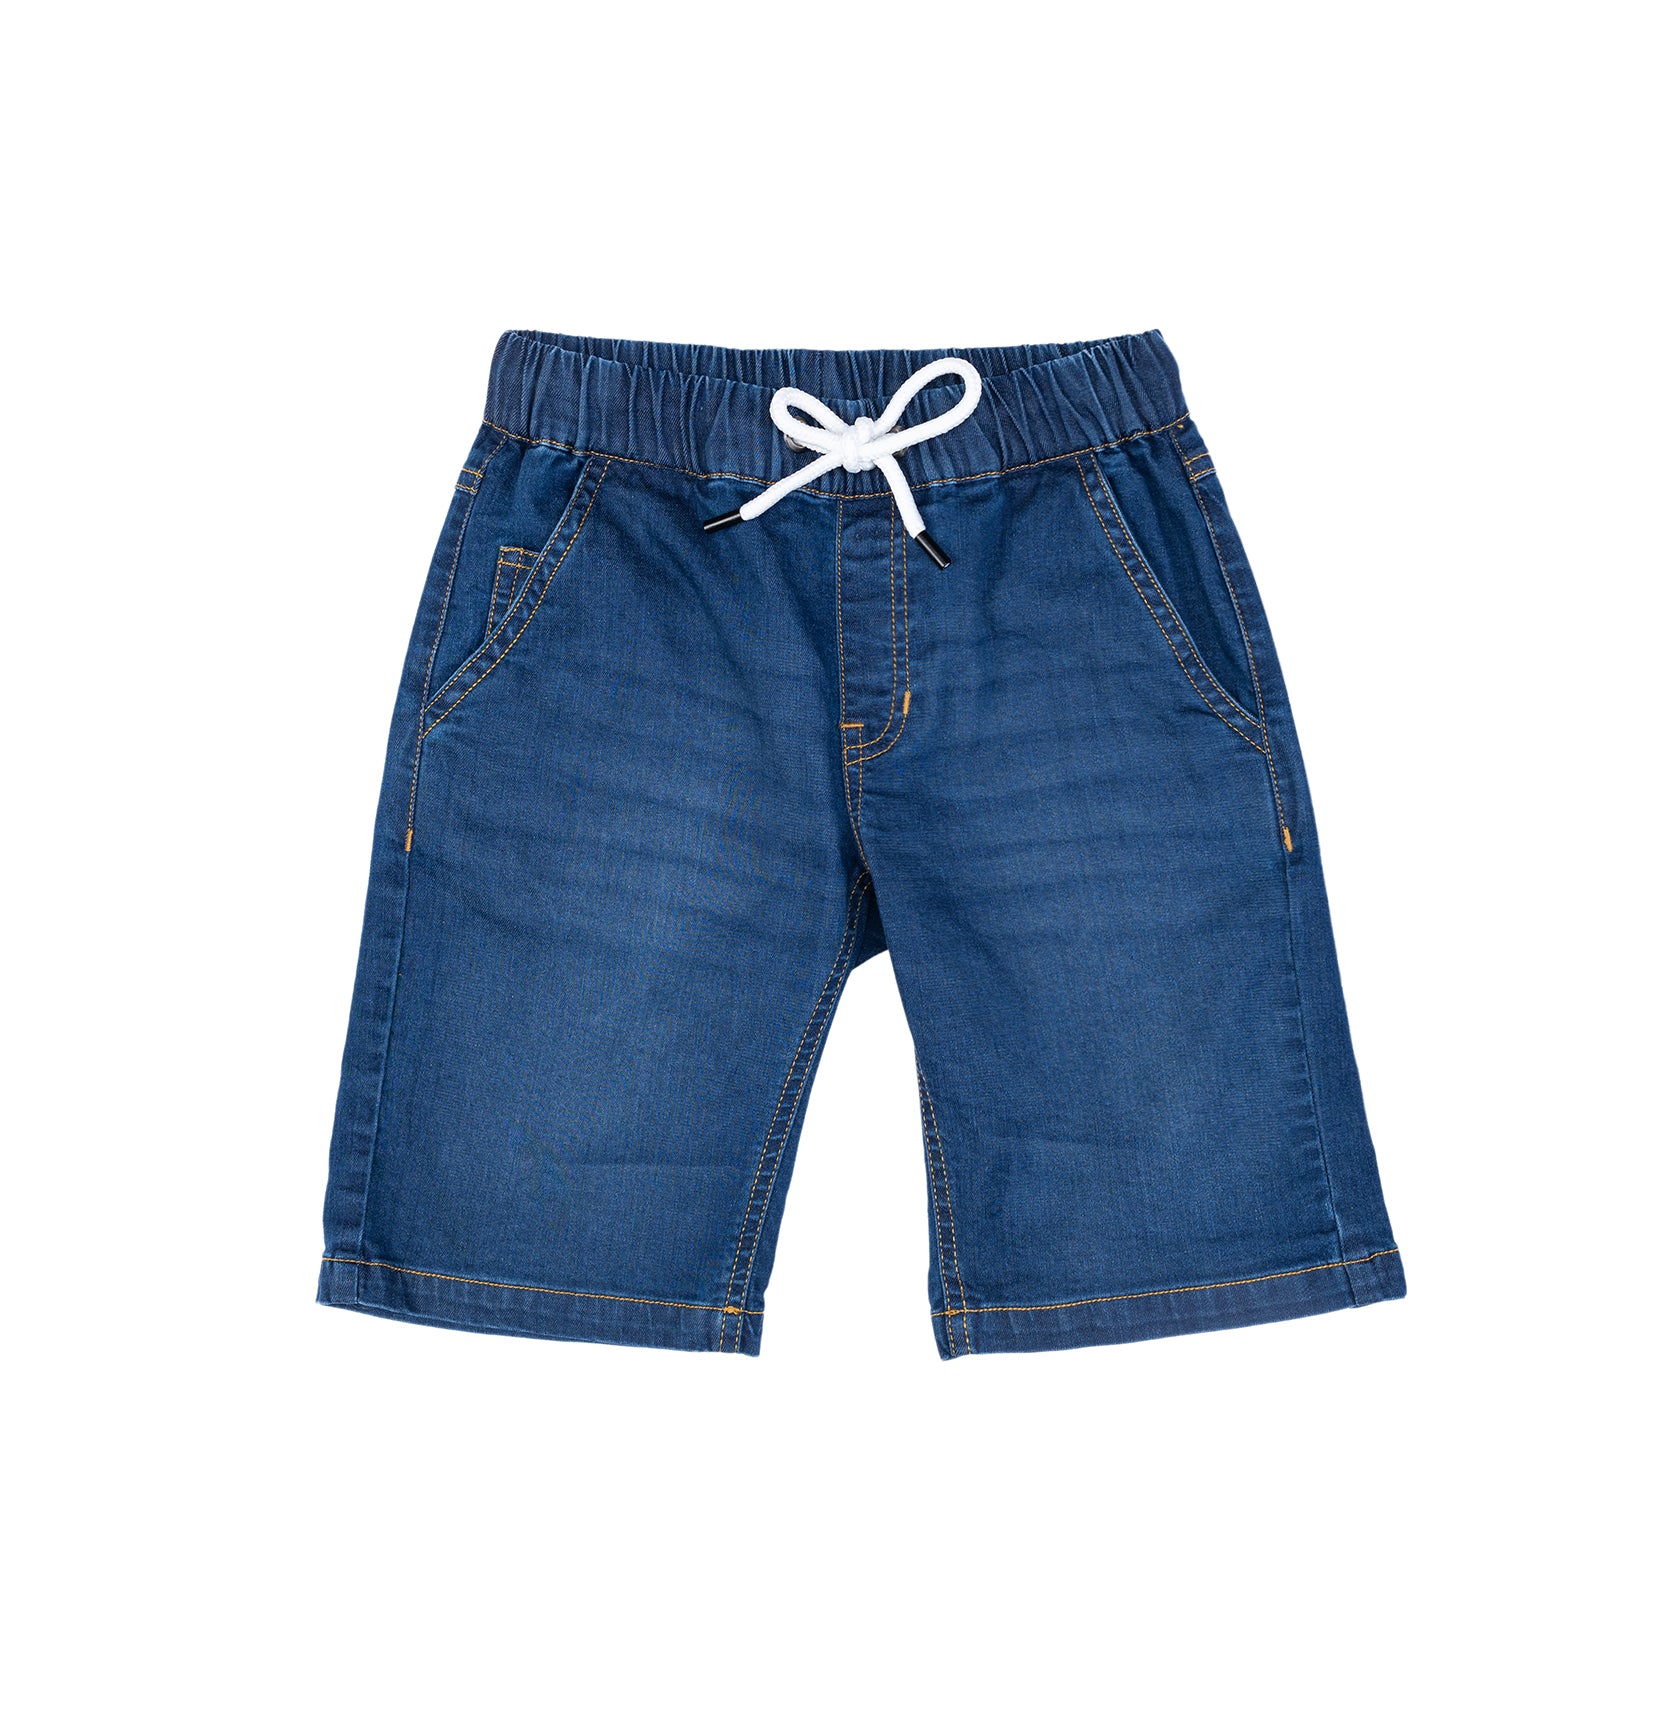 Boy navy short jeans with white band by Pompelo